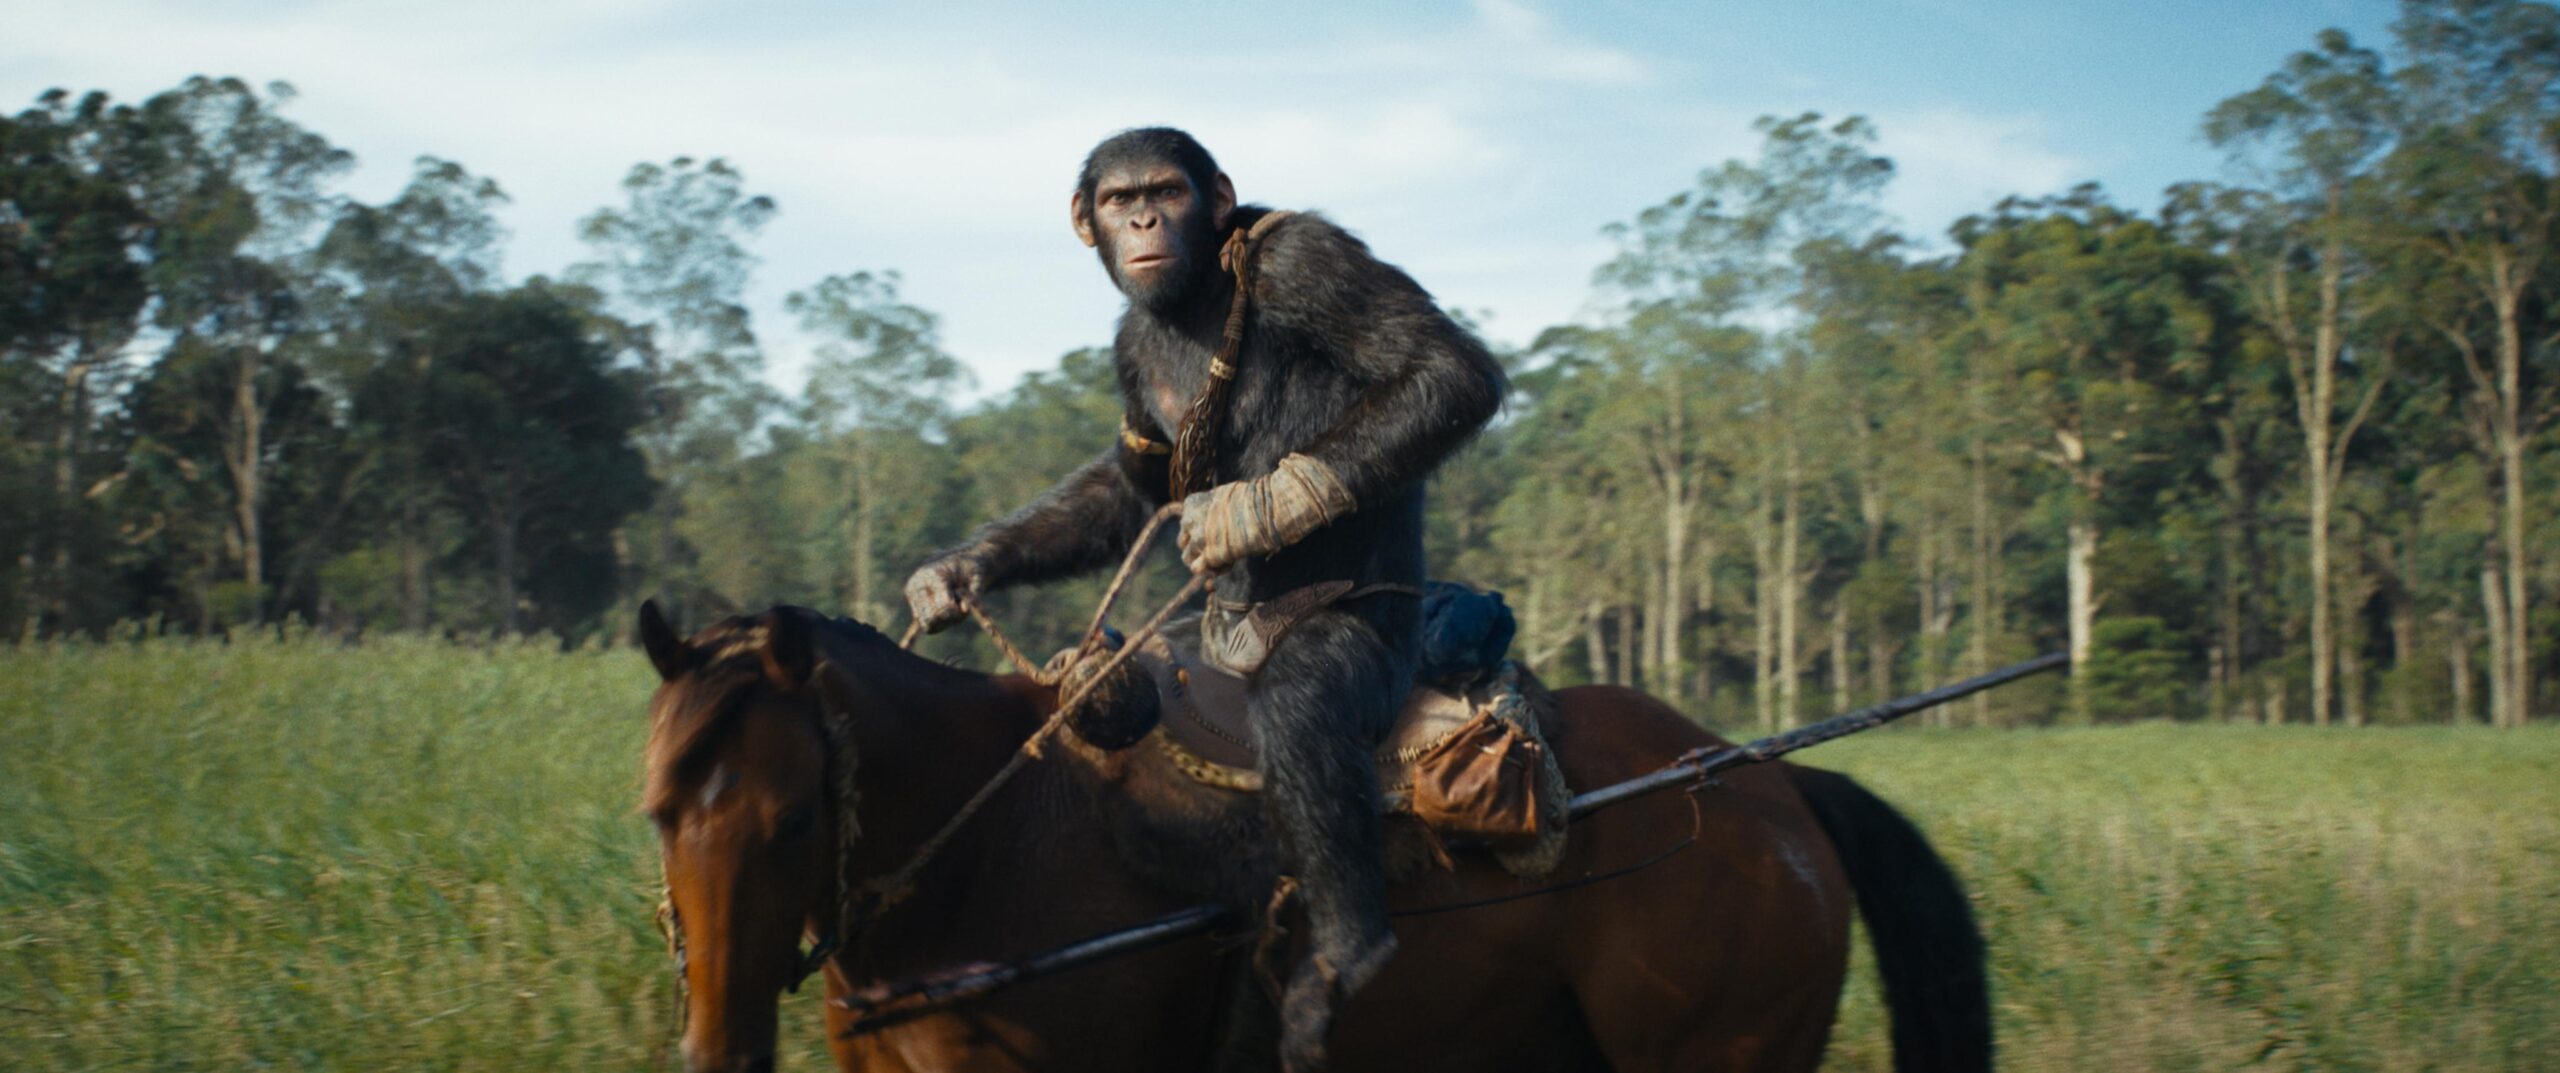 ‘Kingdom of the Planet of the Apes’ Review: Caesar’s Legacy Lives On